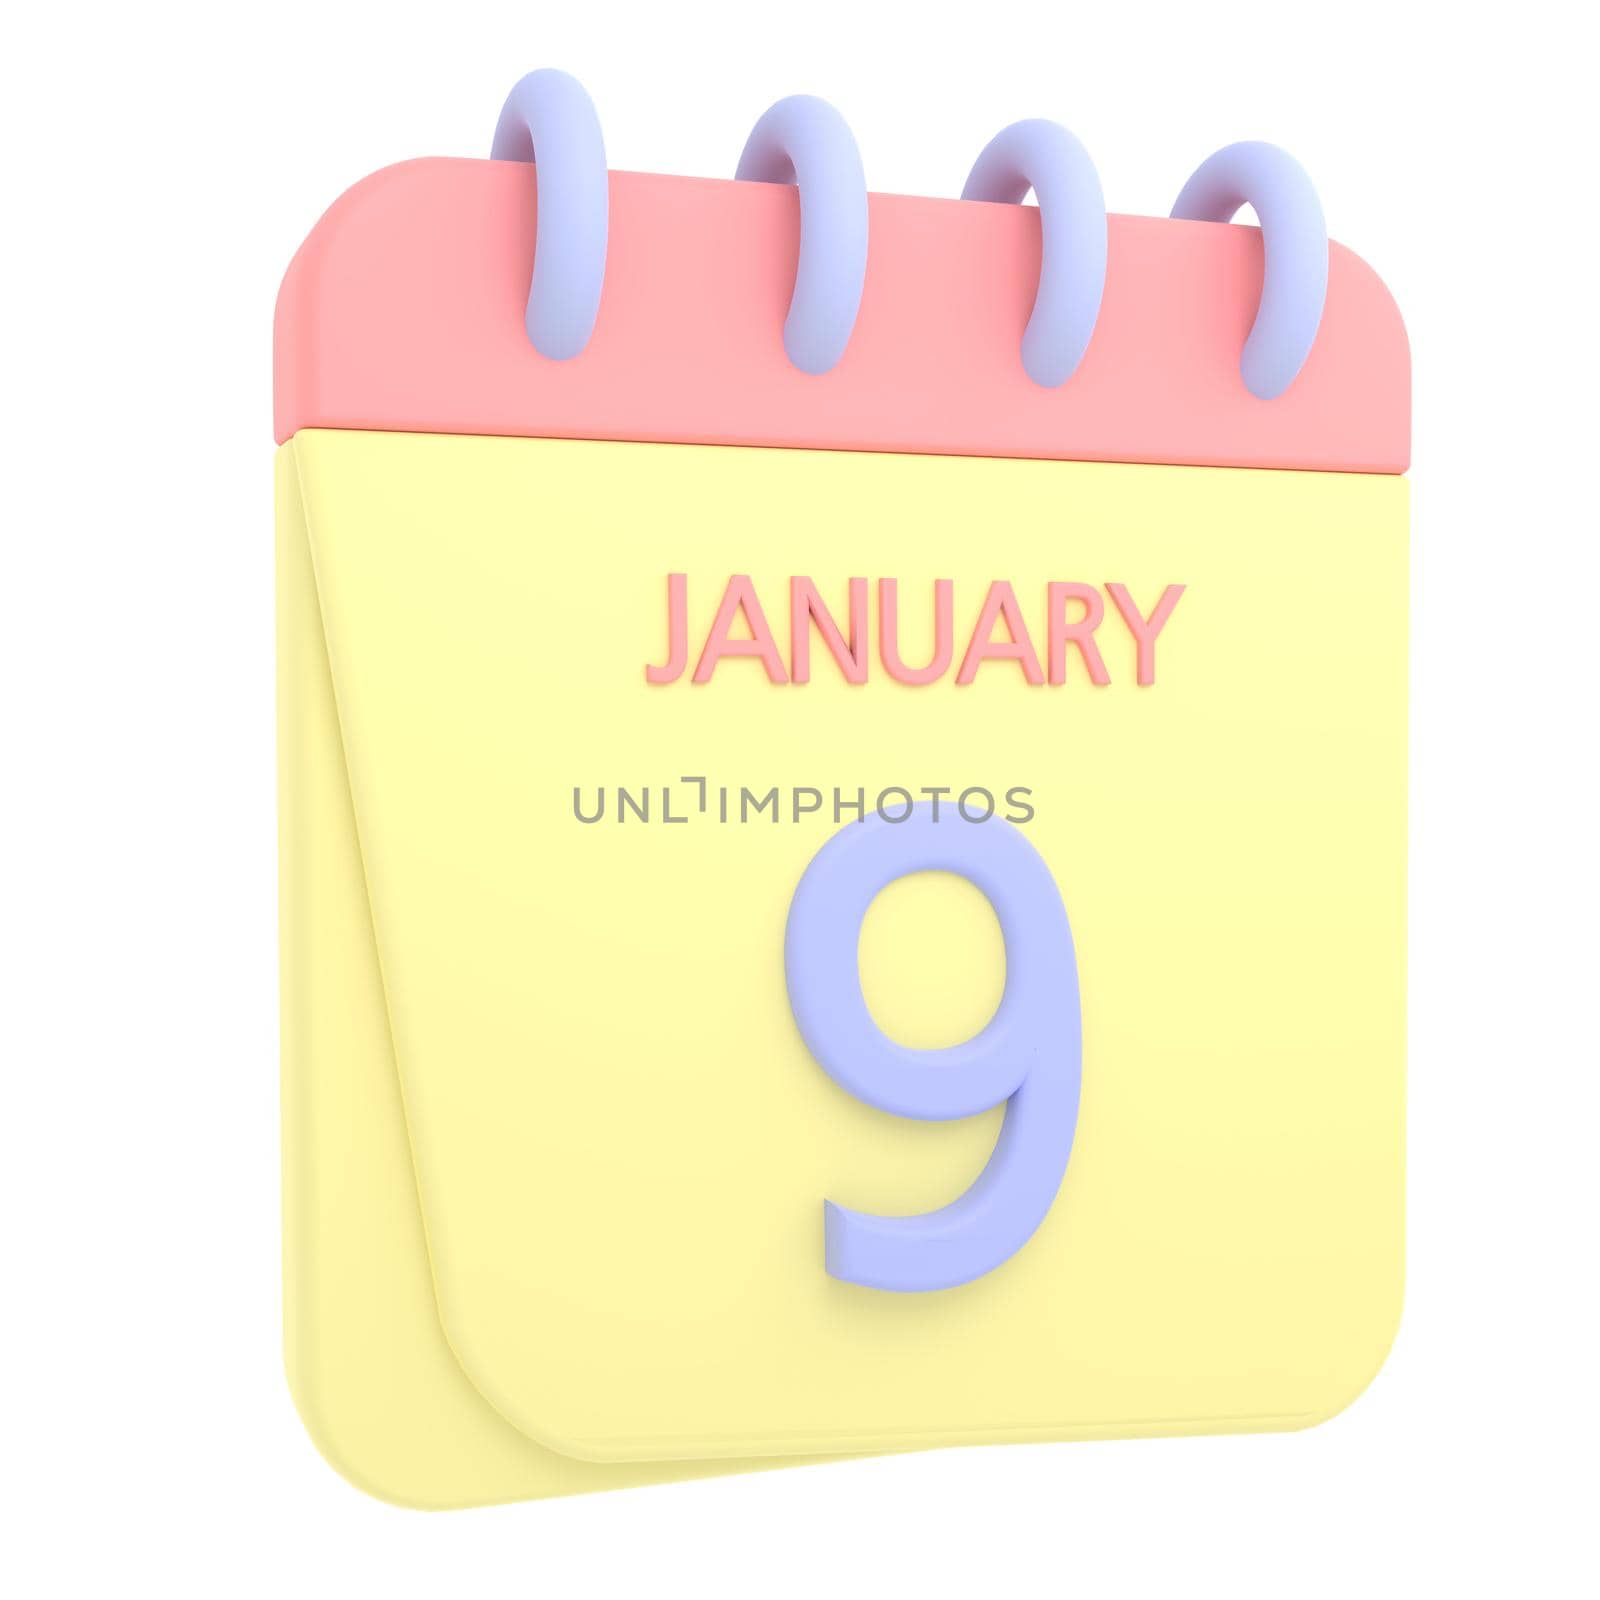 9th January 3D calendar icon. Web style. High resolution image. White background